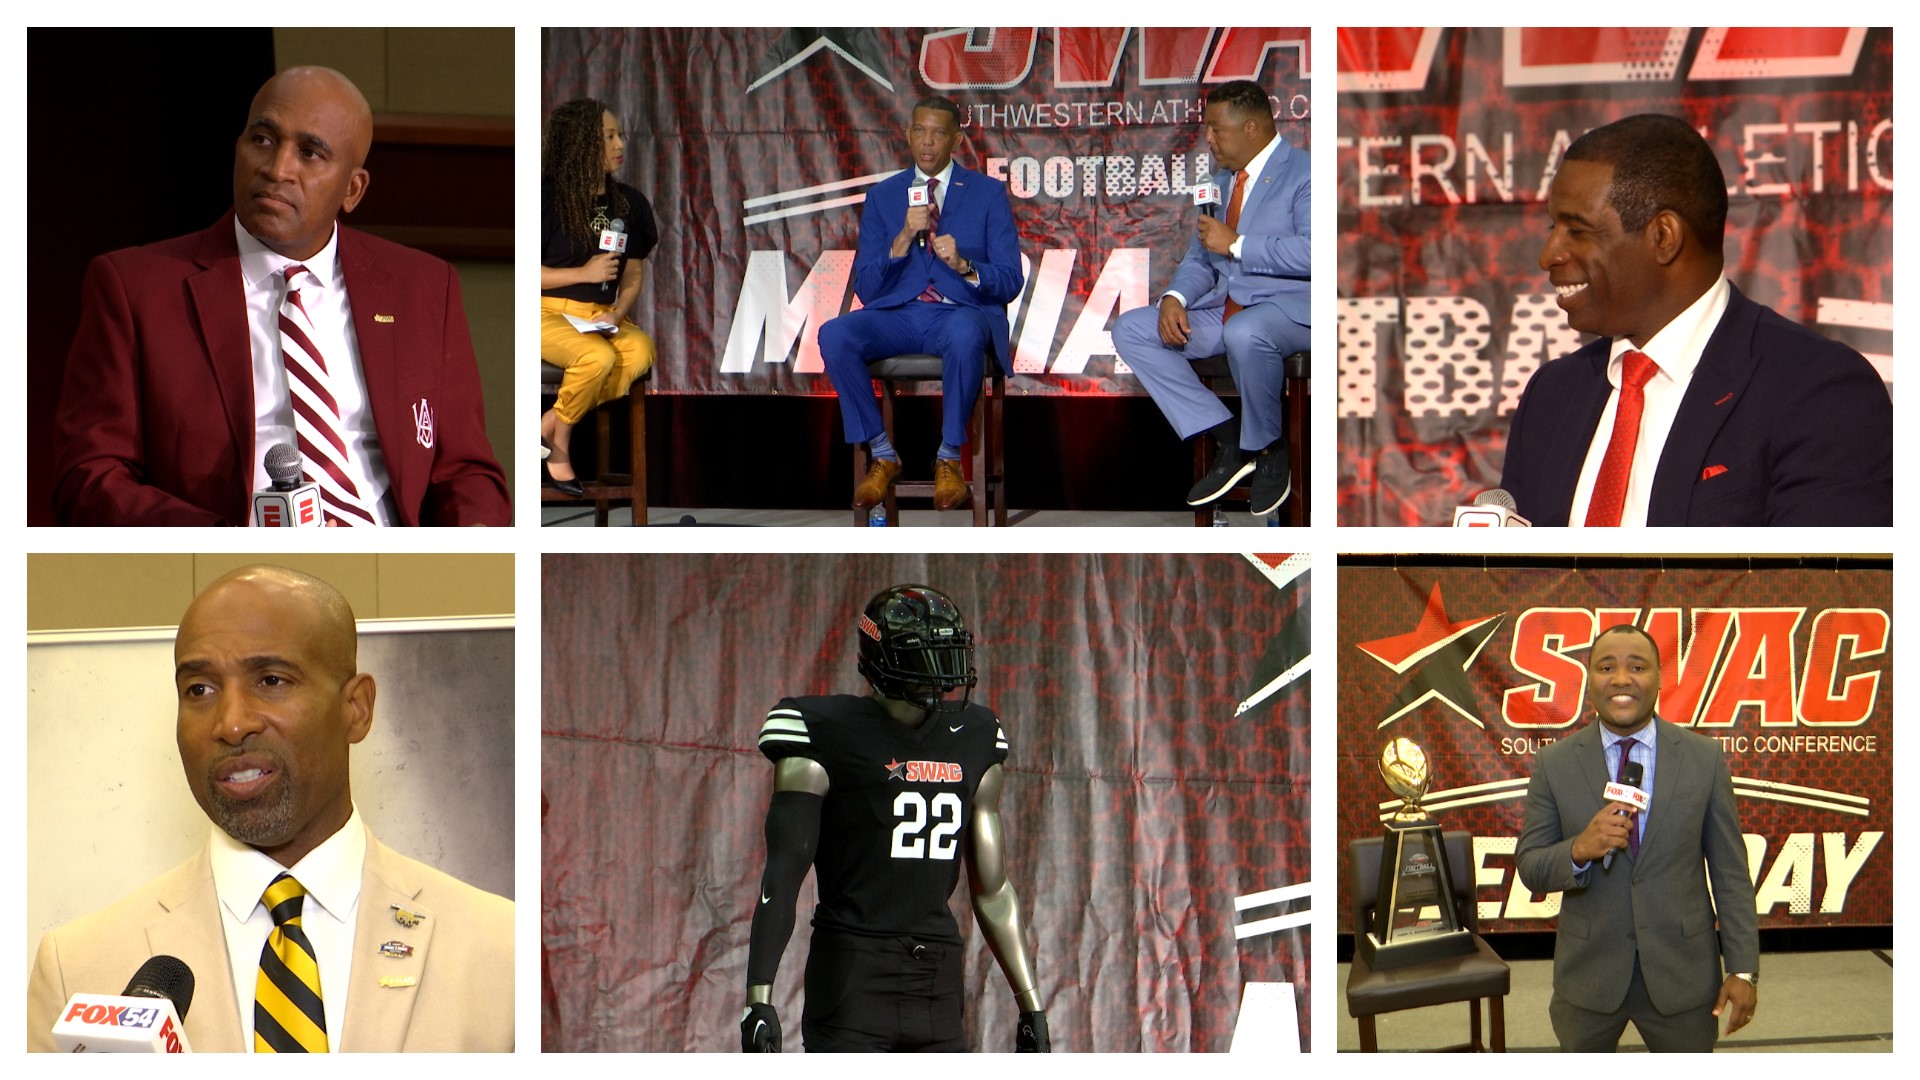 The Southwestern Athletic Conference hosted its annual football media day session, Thursday in Birmingham. Mo Carter spoke to several coaches about the upcoming year